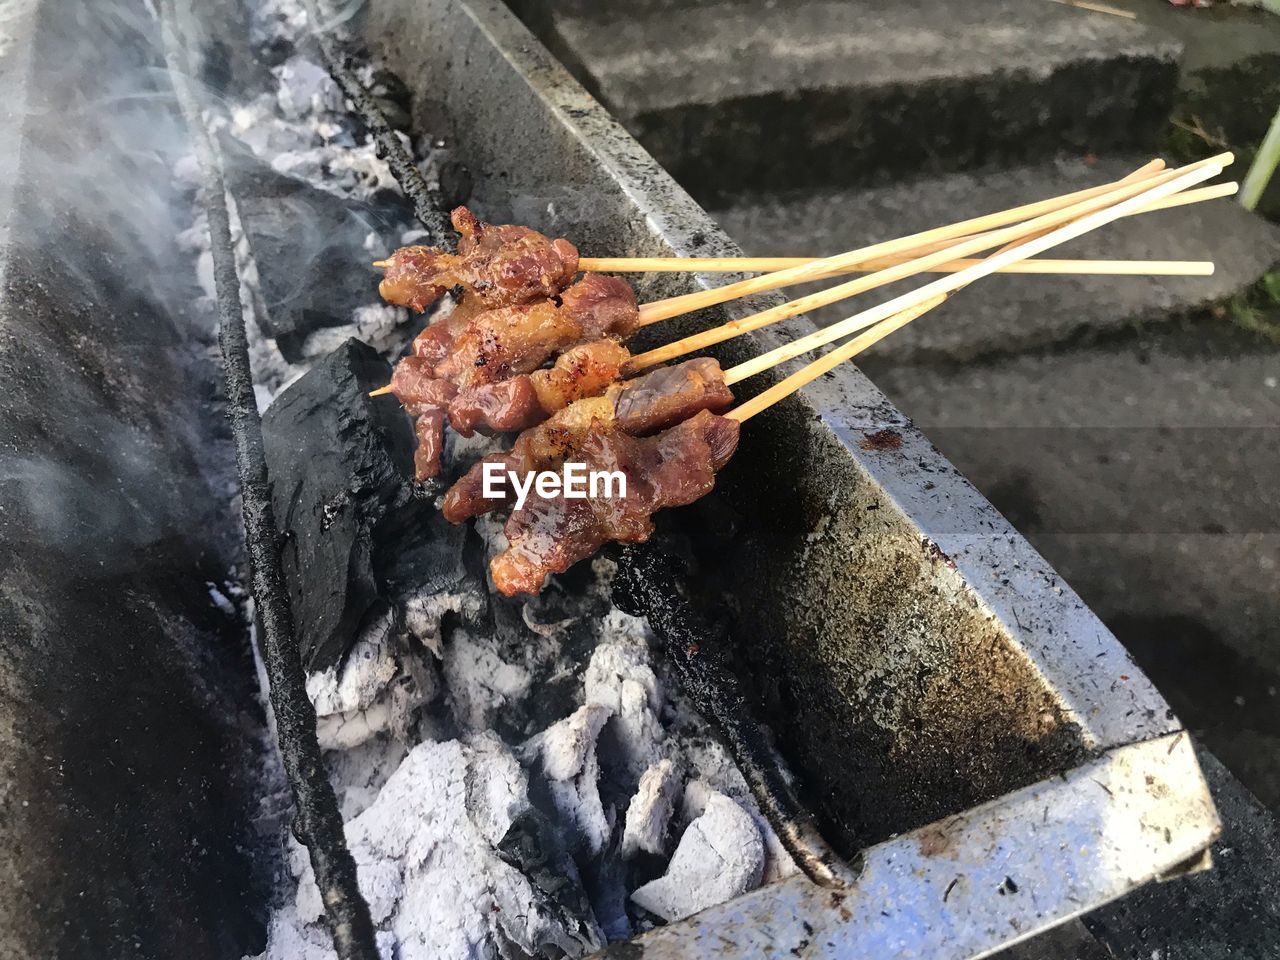 HIGH ANGLE VIEW OF FOOD ON BARBECUE